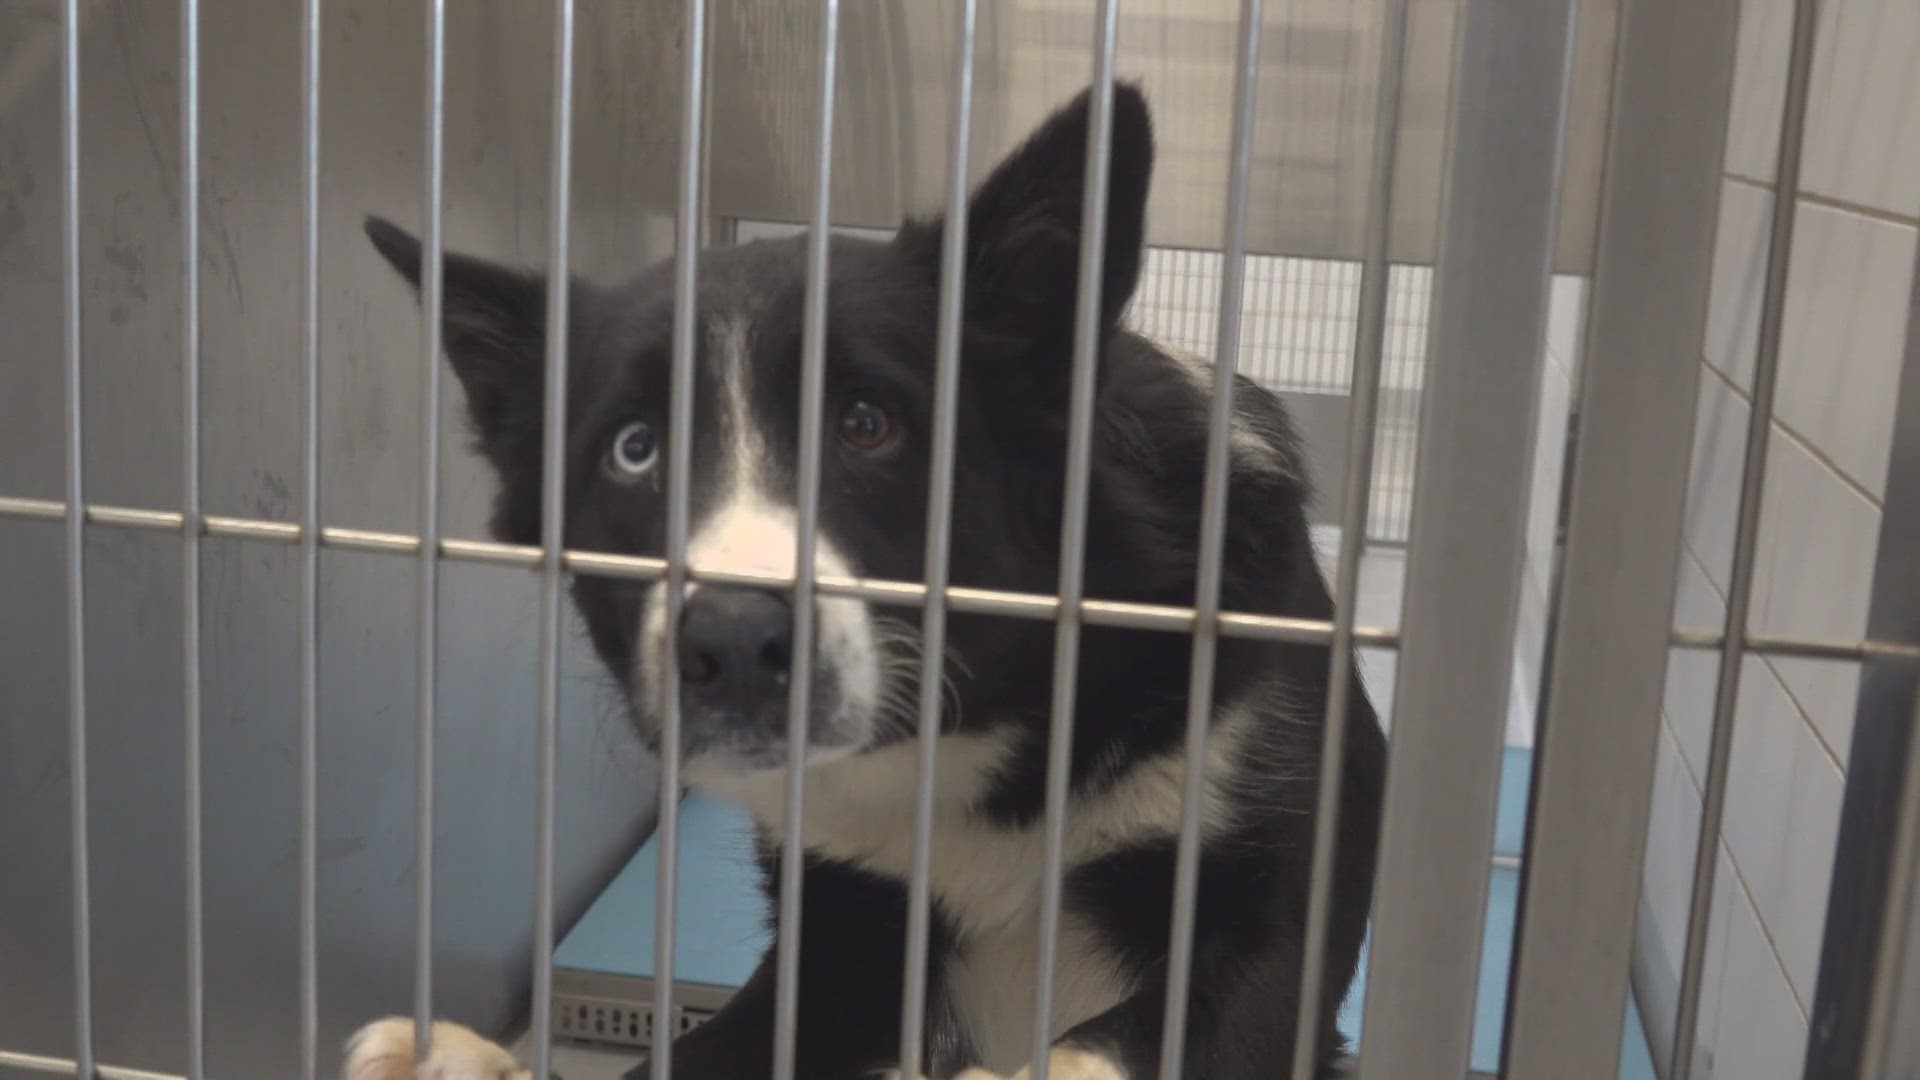 The new ordinance in Odessa will require pets to be spayed and neutered, while limiting the amount of pets to four.